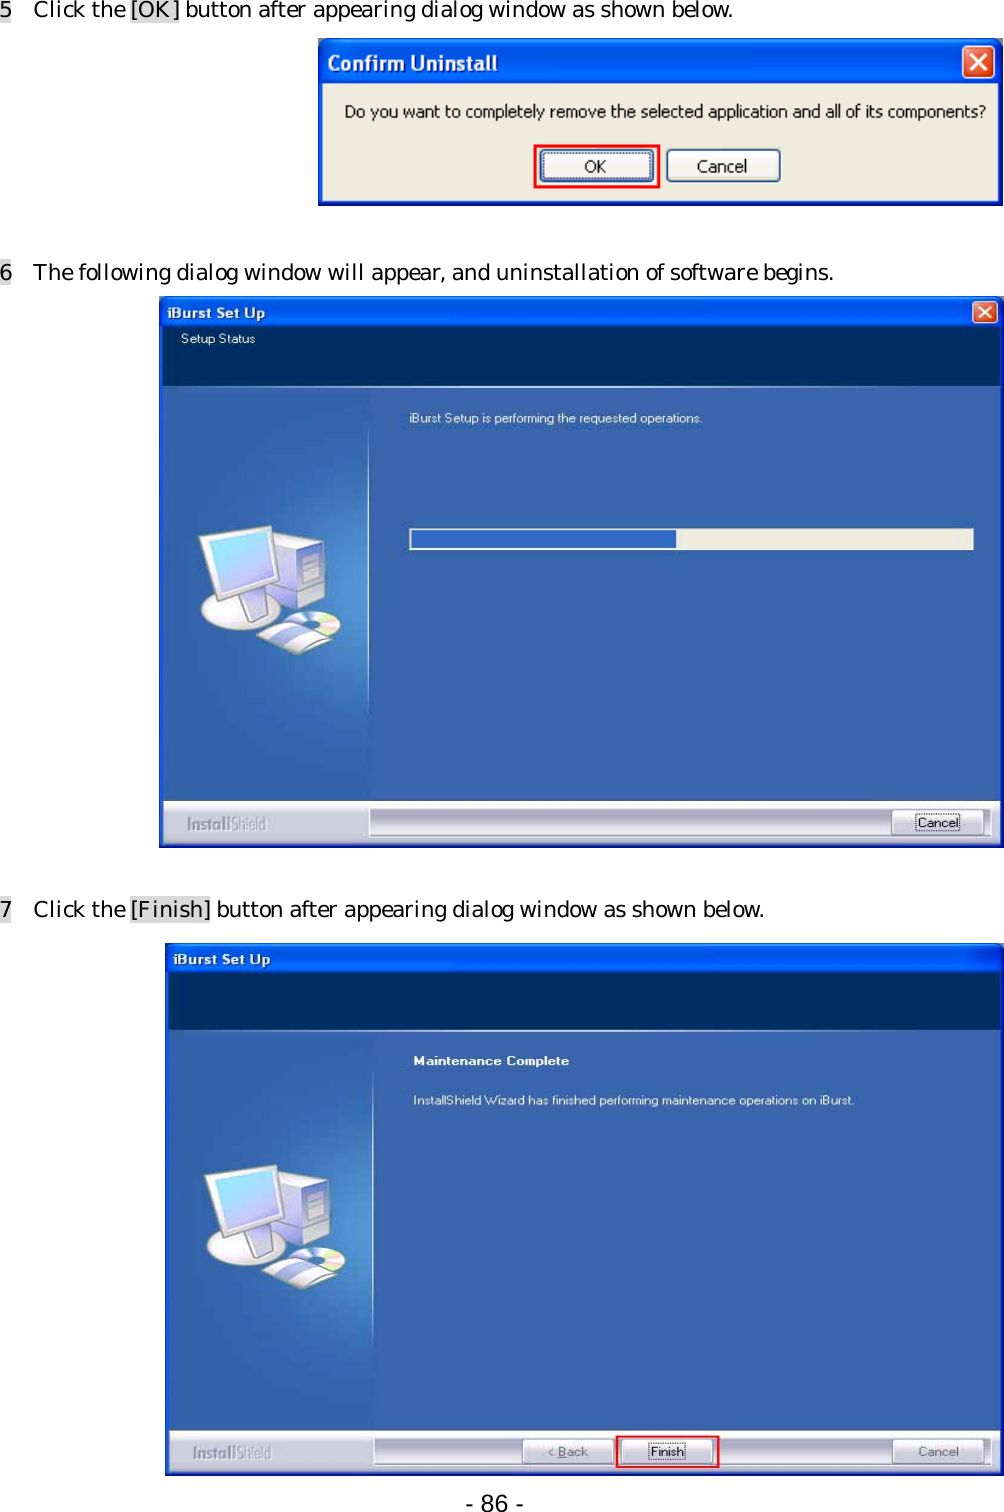 5    Click the [OK] button after appearing dialog window as shown below.   6    The following dialog window will appear, and uninstallation of software begins.   7    Click the [Finish] button after appearing dialog window as shown below.  - 86 -  